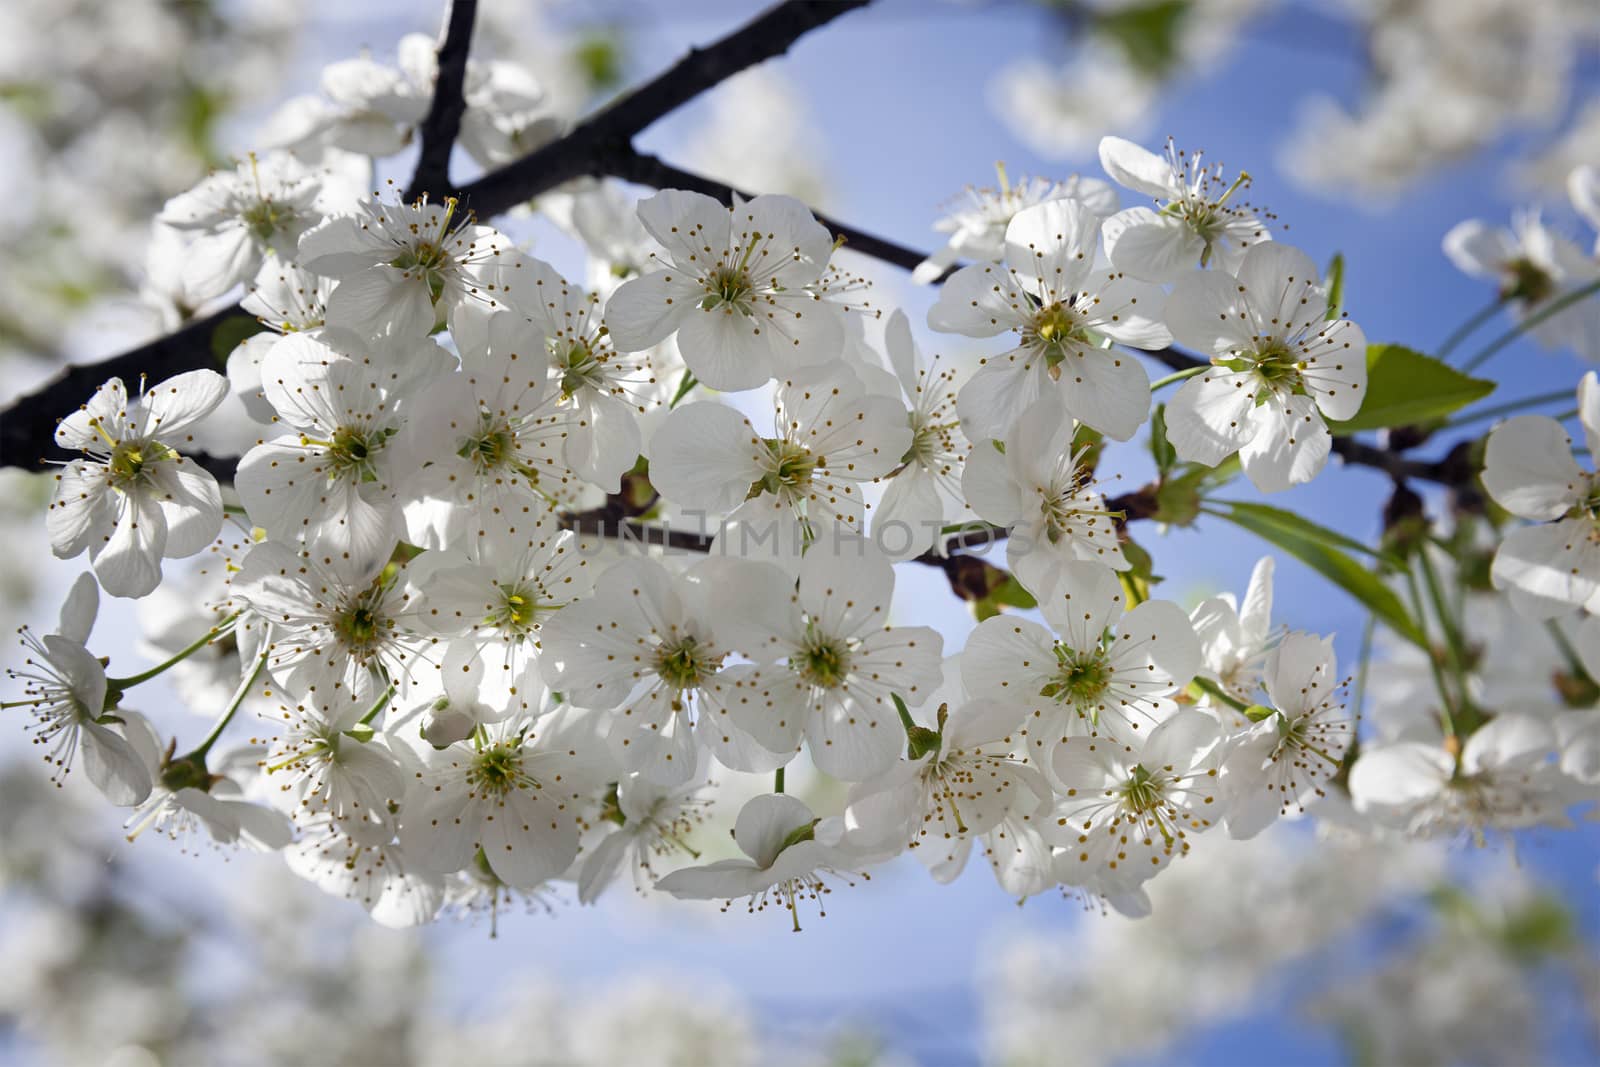   the inflorescence of cherry photographed by a close up. spring season